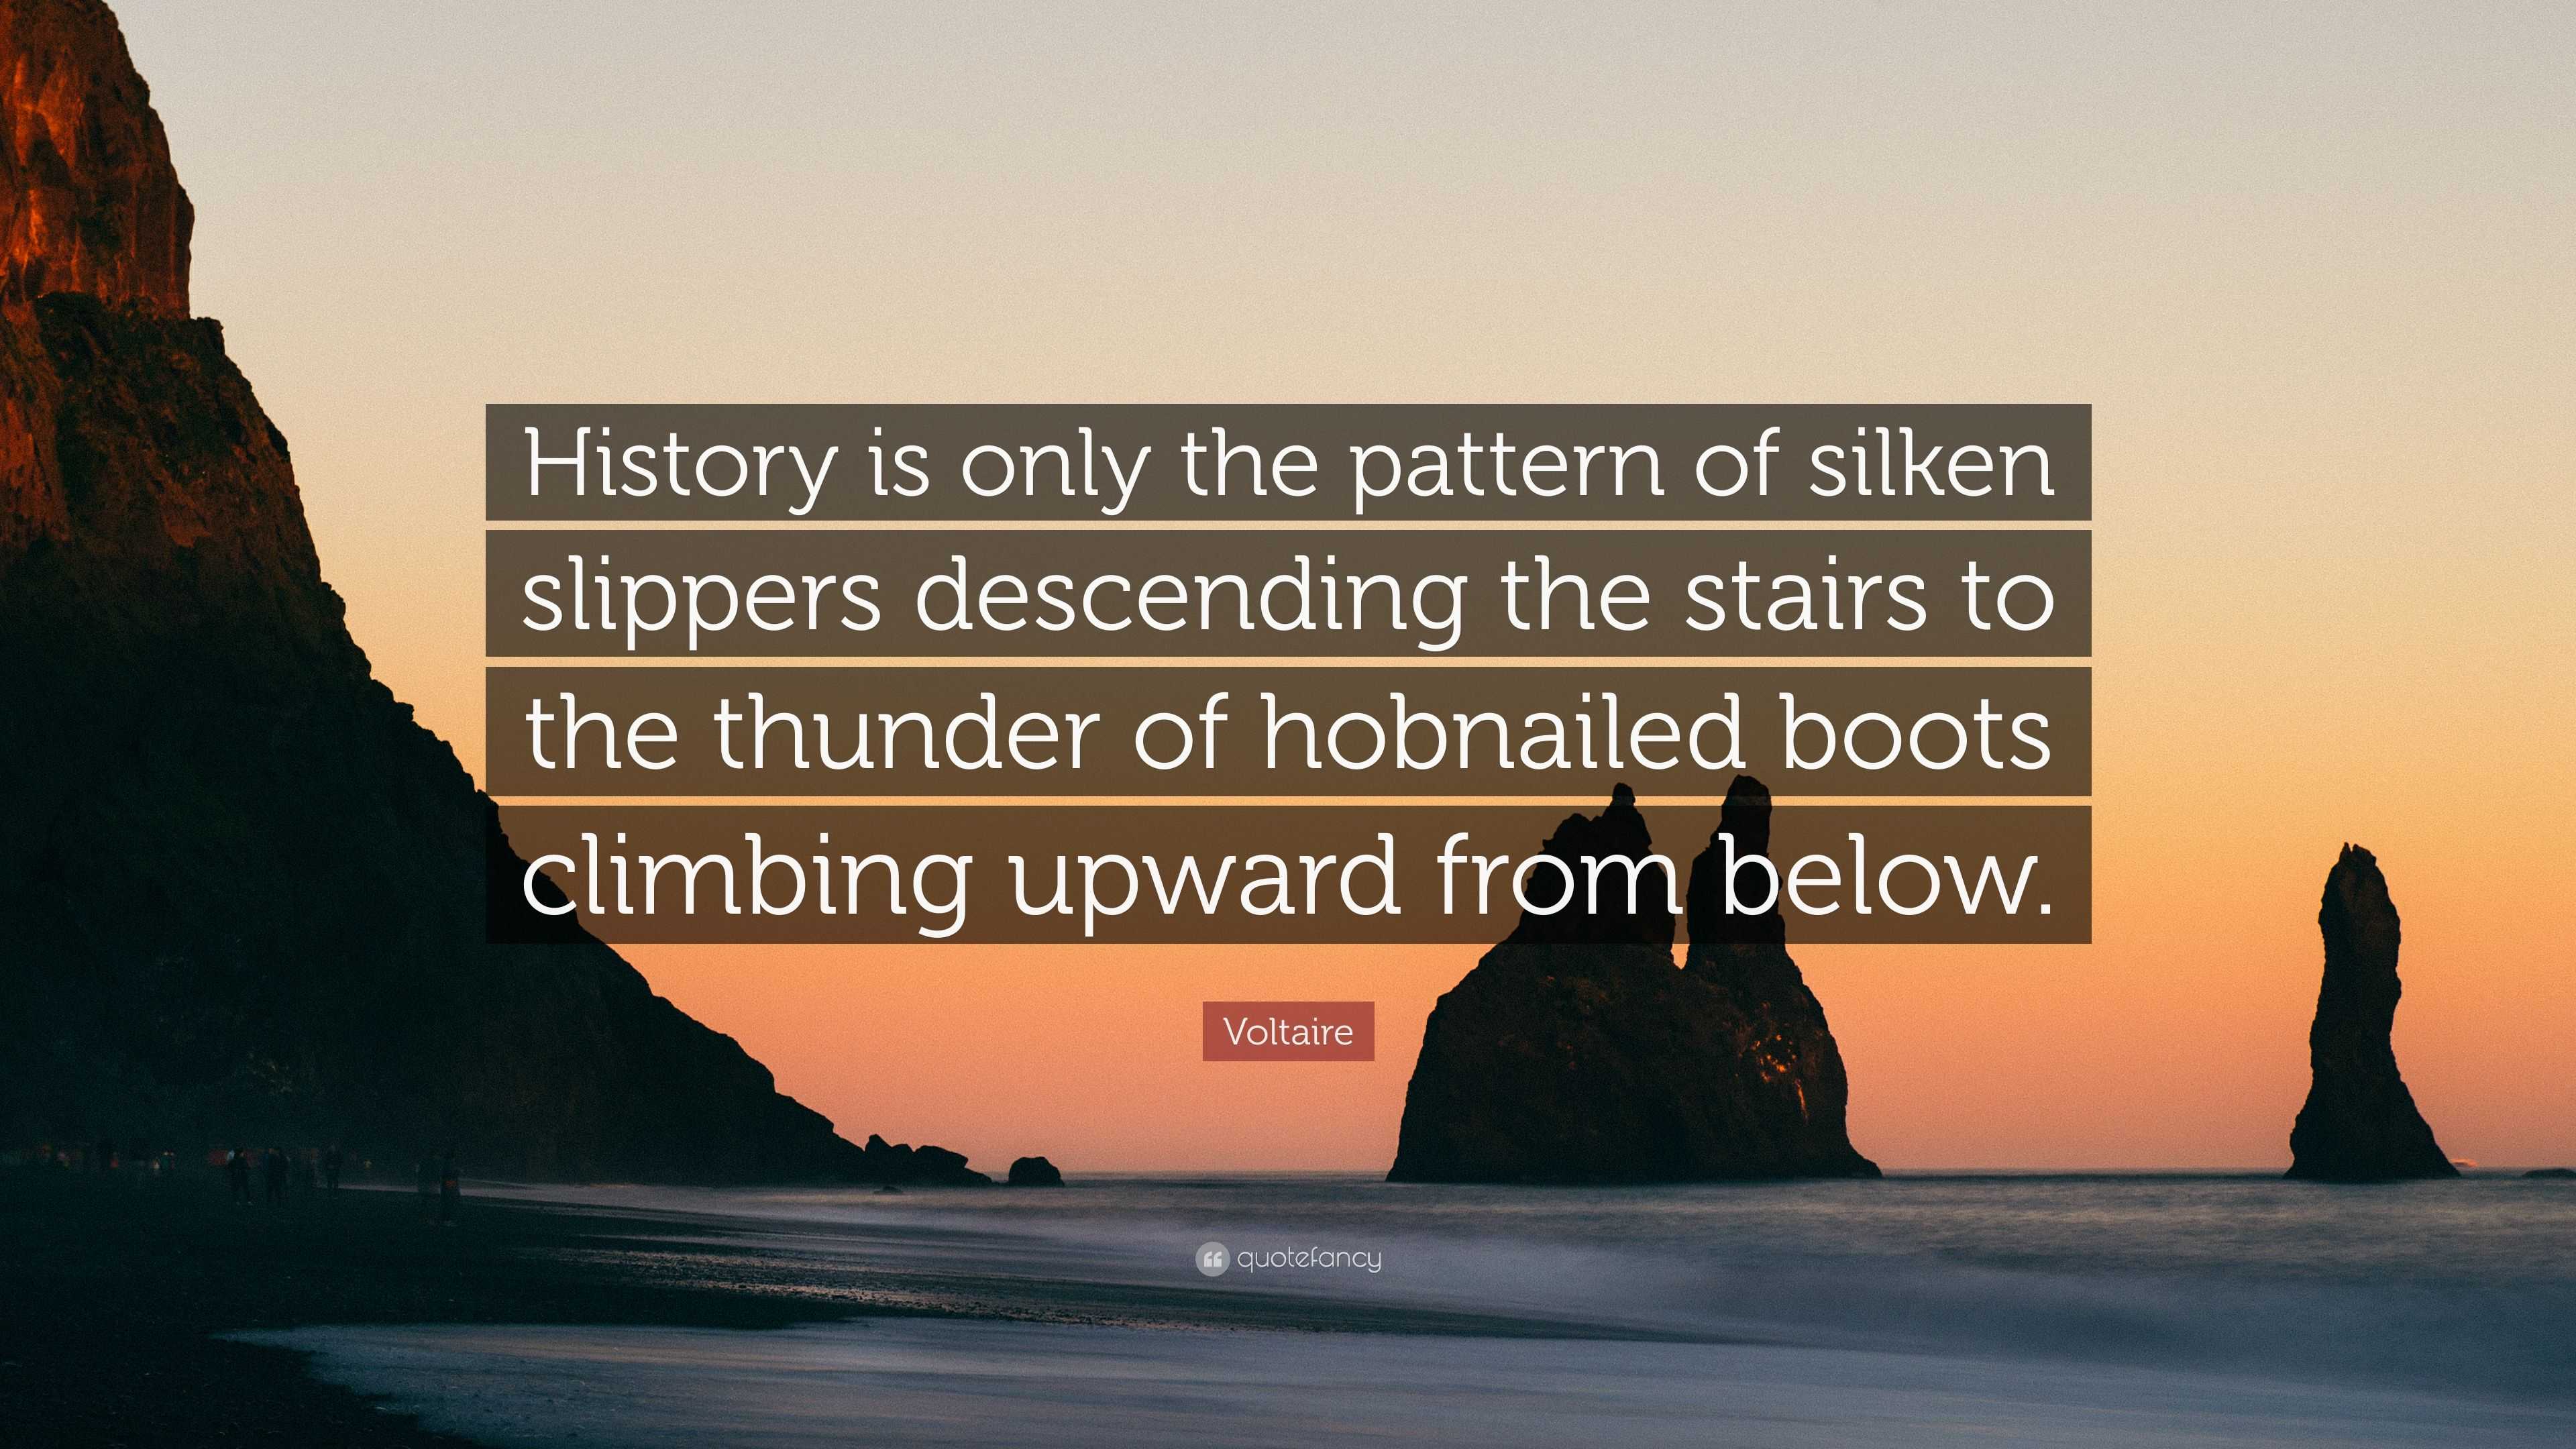 Voltaire Quote: “History is only the pattern of silken slippers descending the stairs to the thunder of hobnailed climbing upward f...”